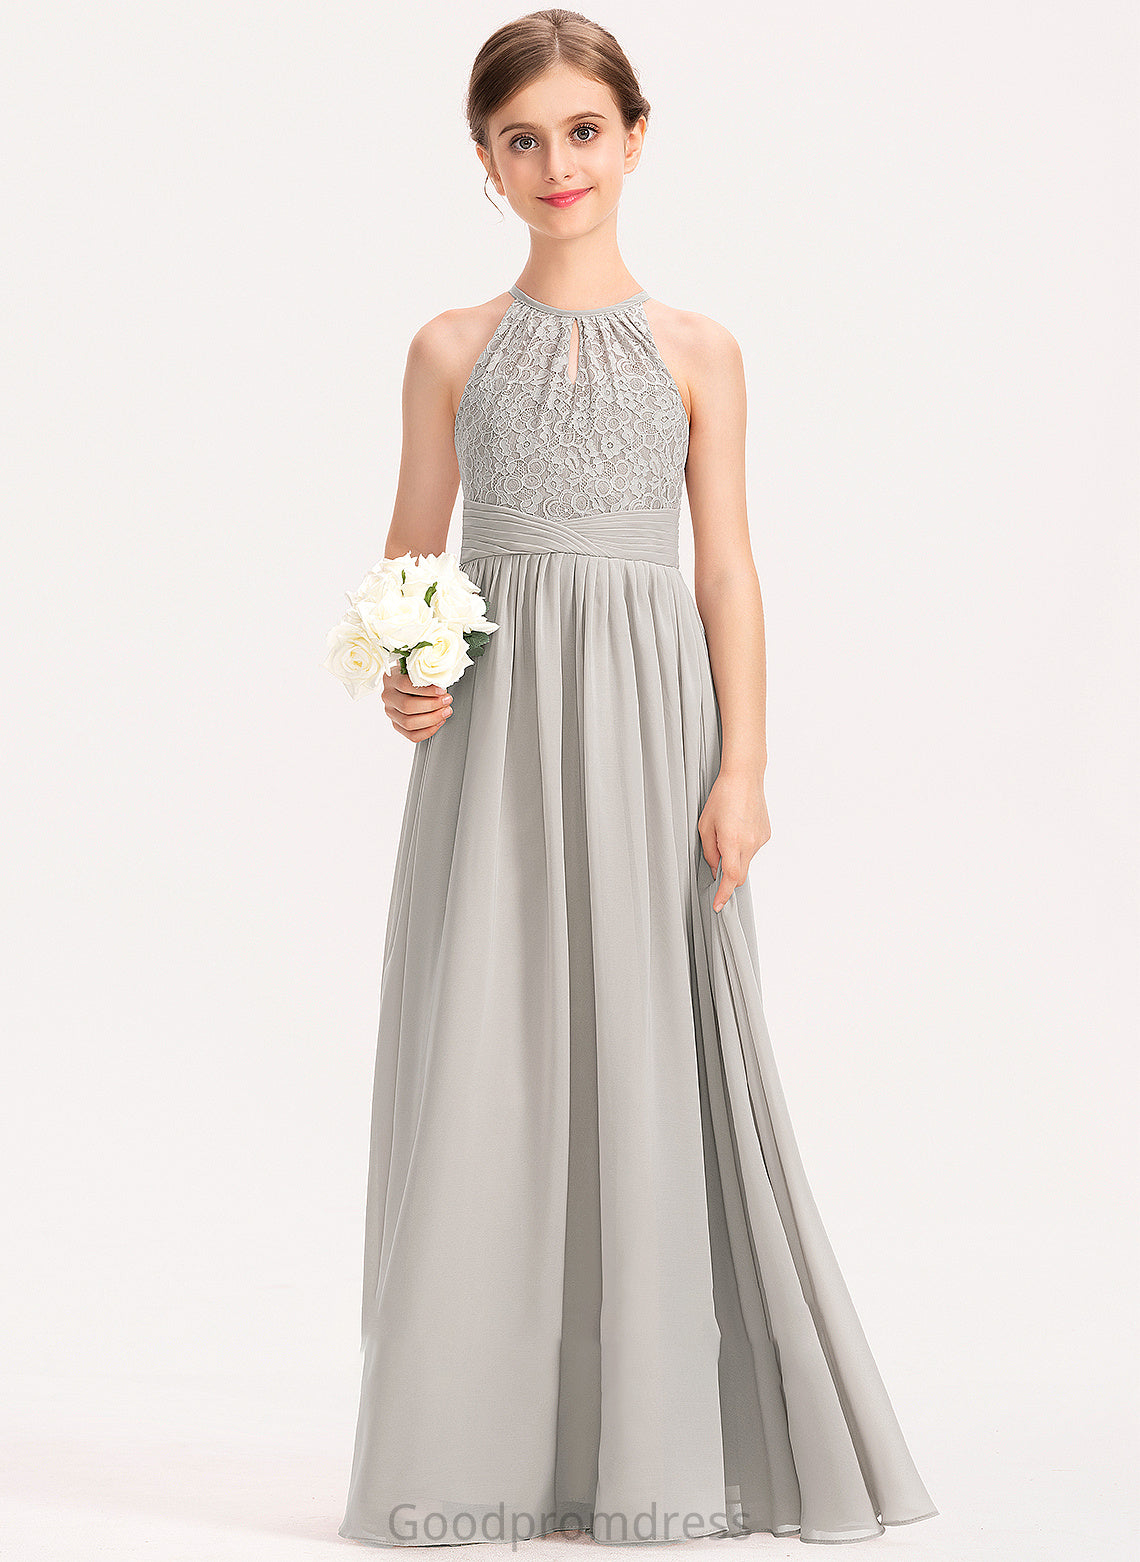 Scoop Abril A-Line Neck Junior Bridesmaid Dresses Lace With Chiffon Floor-Length Ruffle